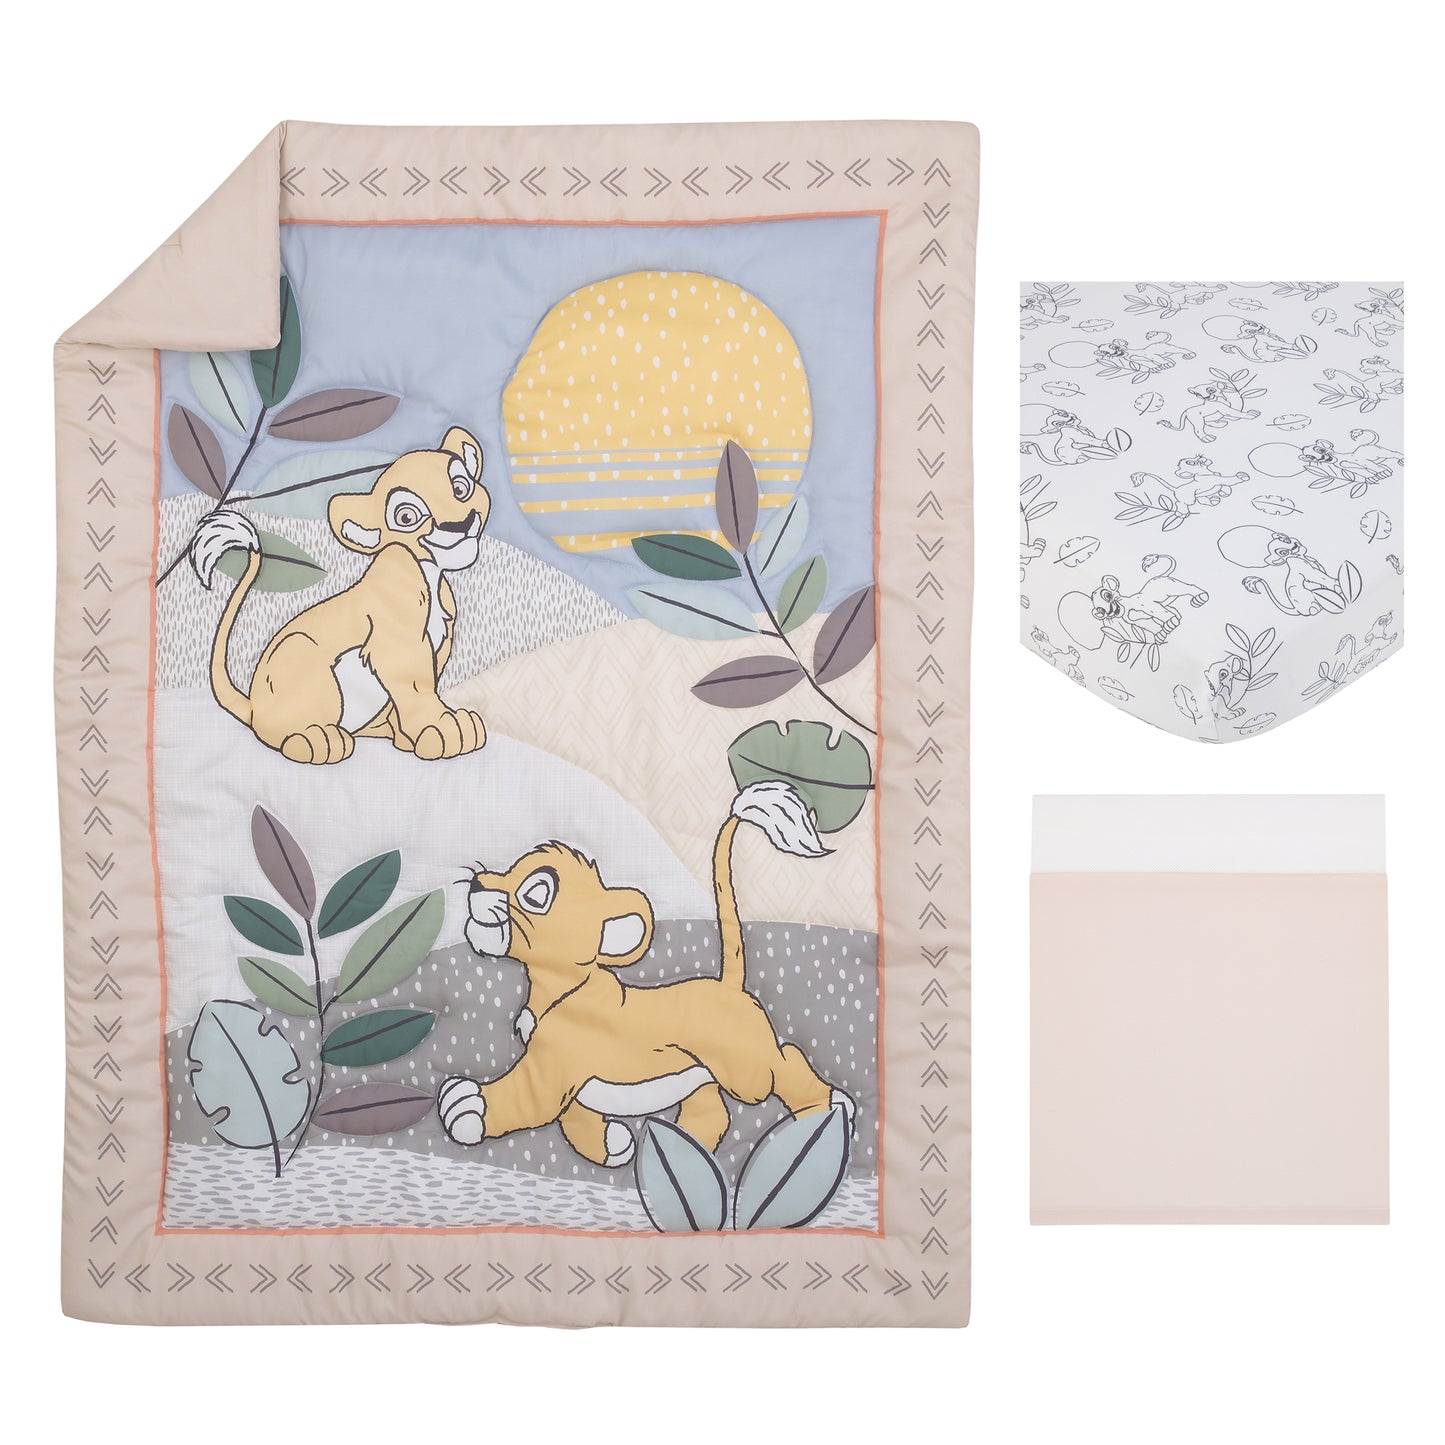 Disney Lion King Leader of the Pack Grey, Sage, Ivory and Yellow 3 Piece Nursery Crib Bedding Set - Comforter, Fitted Crib Sheet, and Crib Skirt